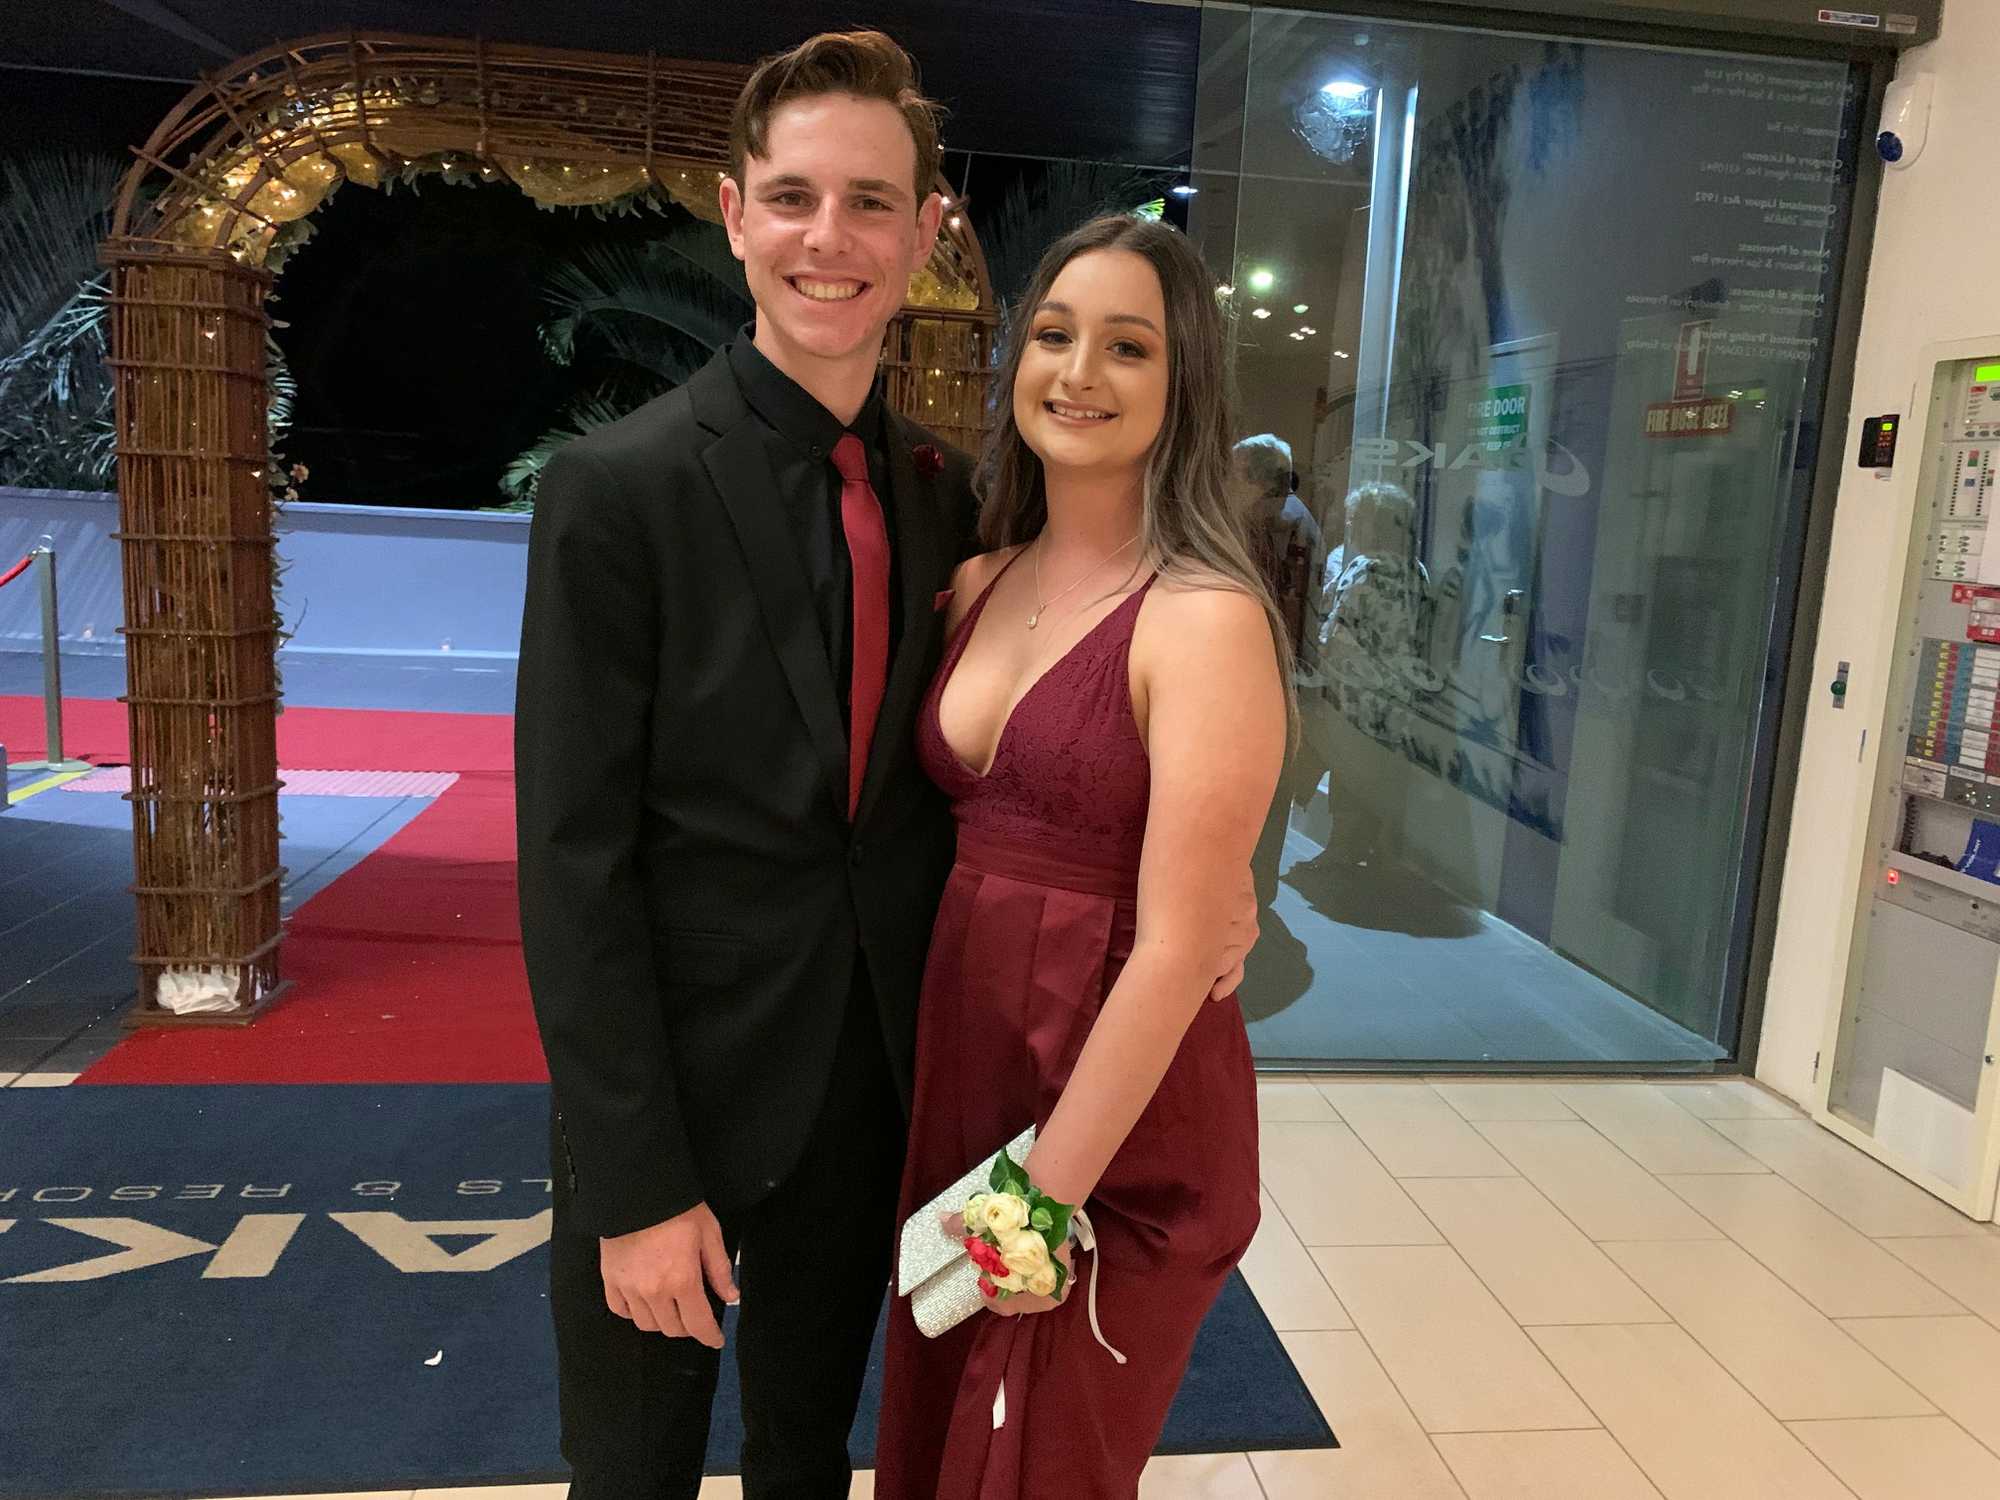 GALLERY: Xavier Catholic College formal | The Courier Mail